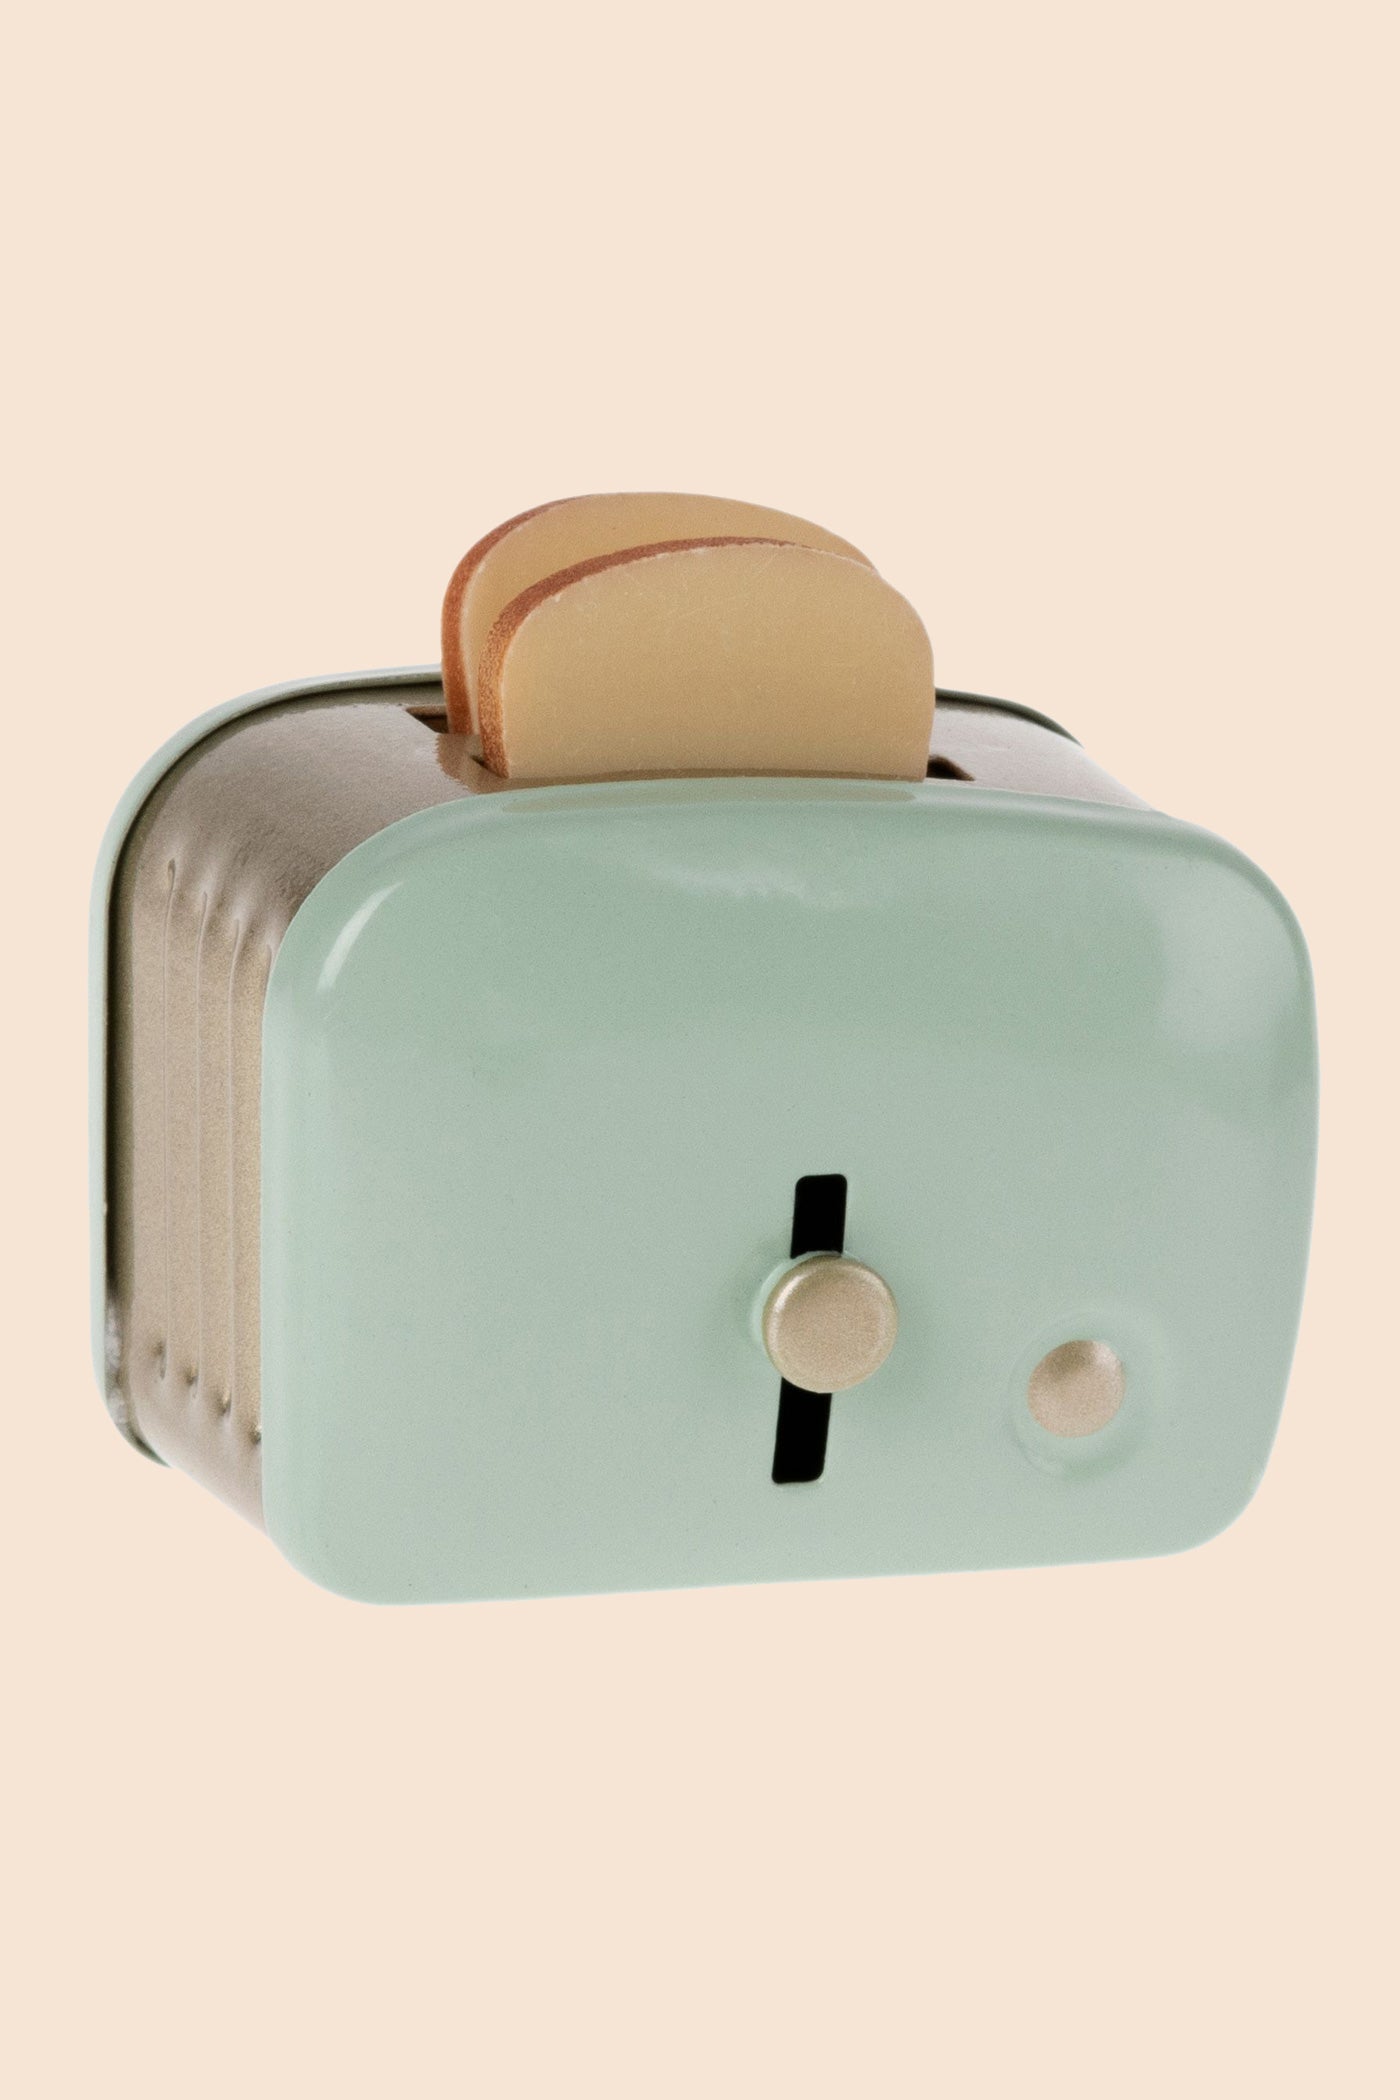 Maileg Miniature Toaster with bread-Mint